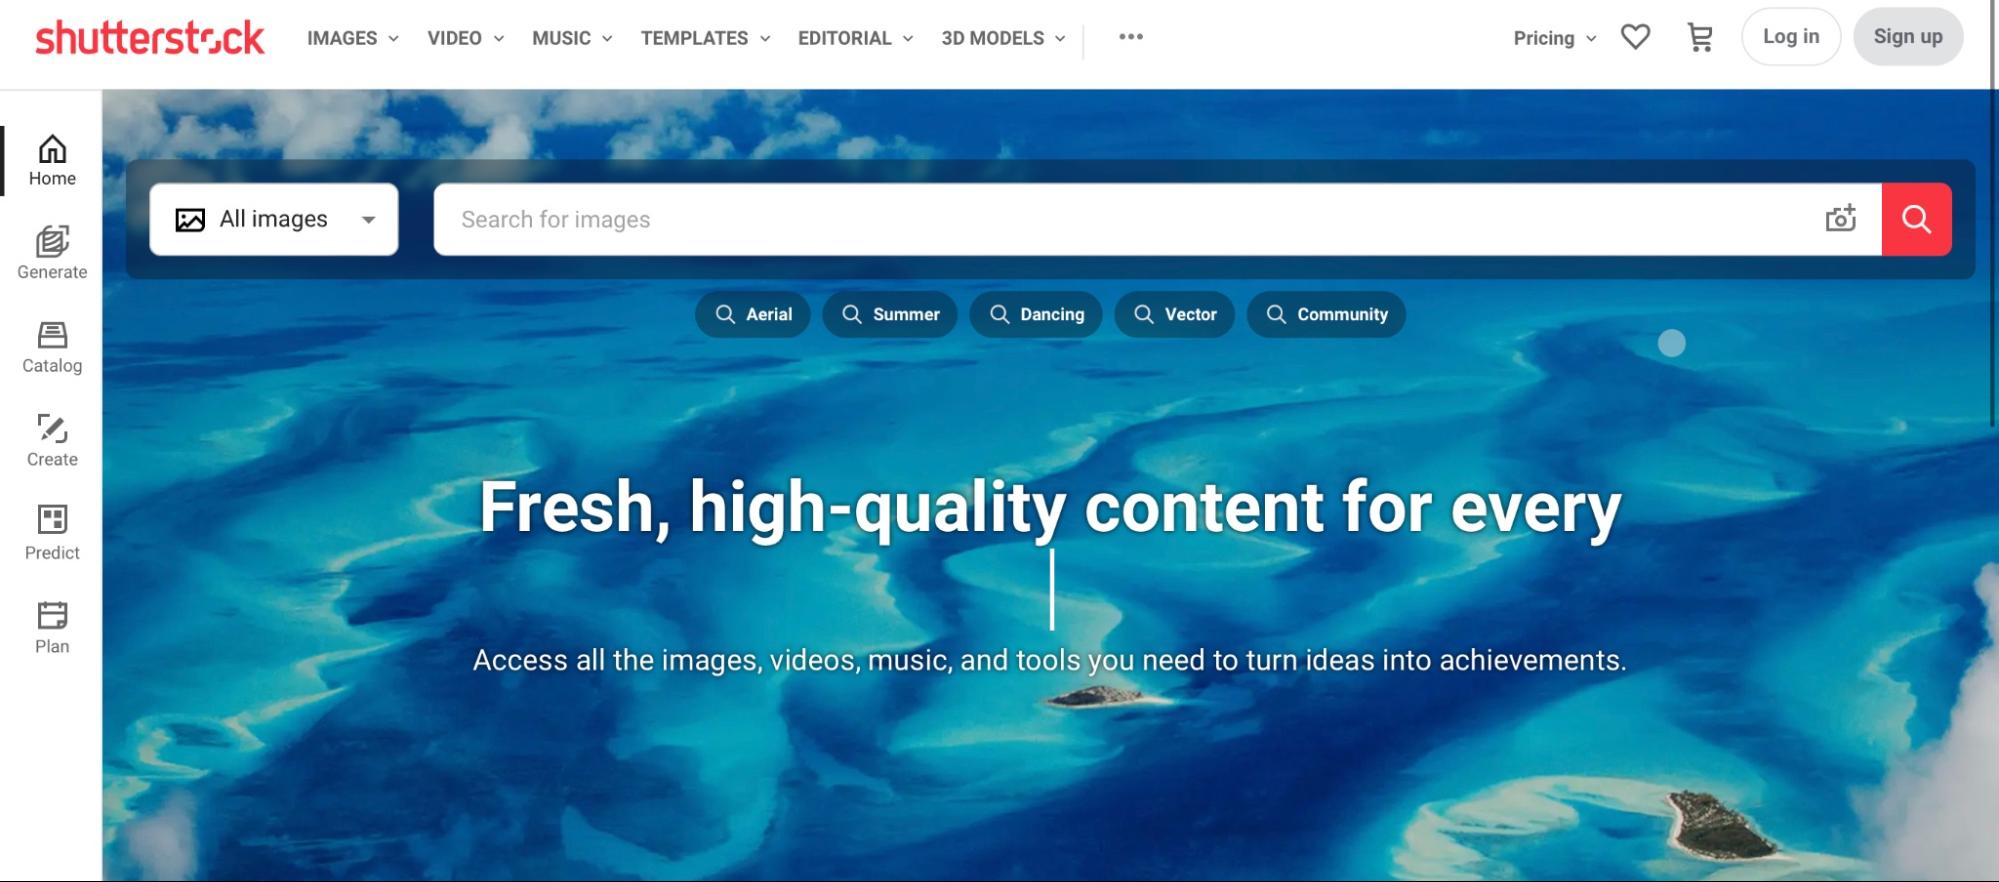 Shutterstock homepage featuring a search bar and background image of the ocean